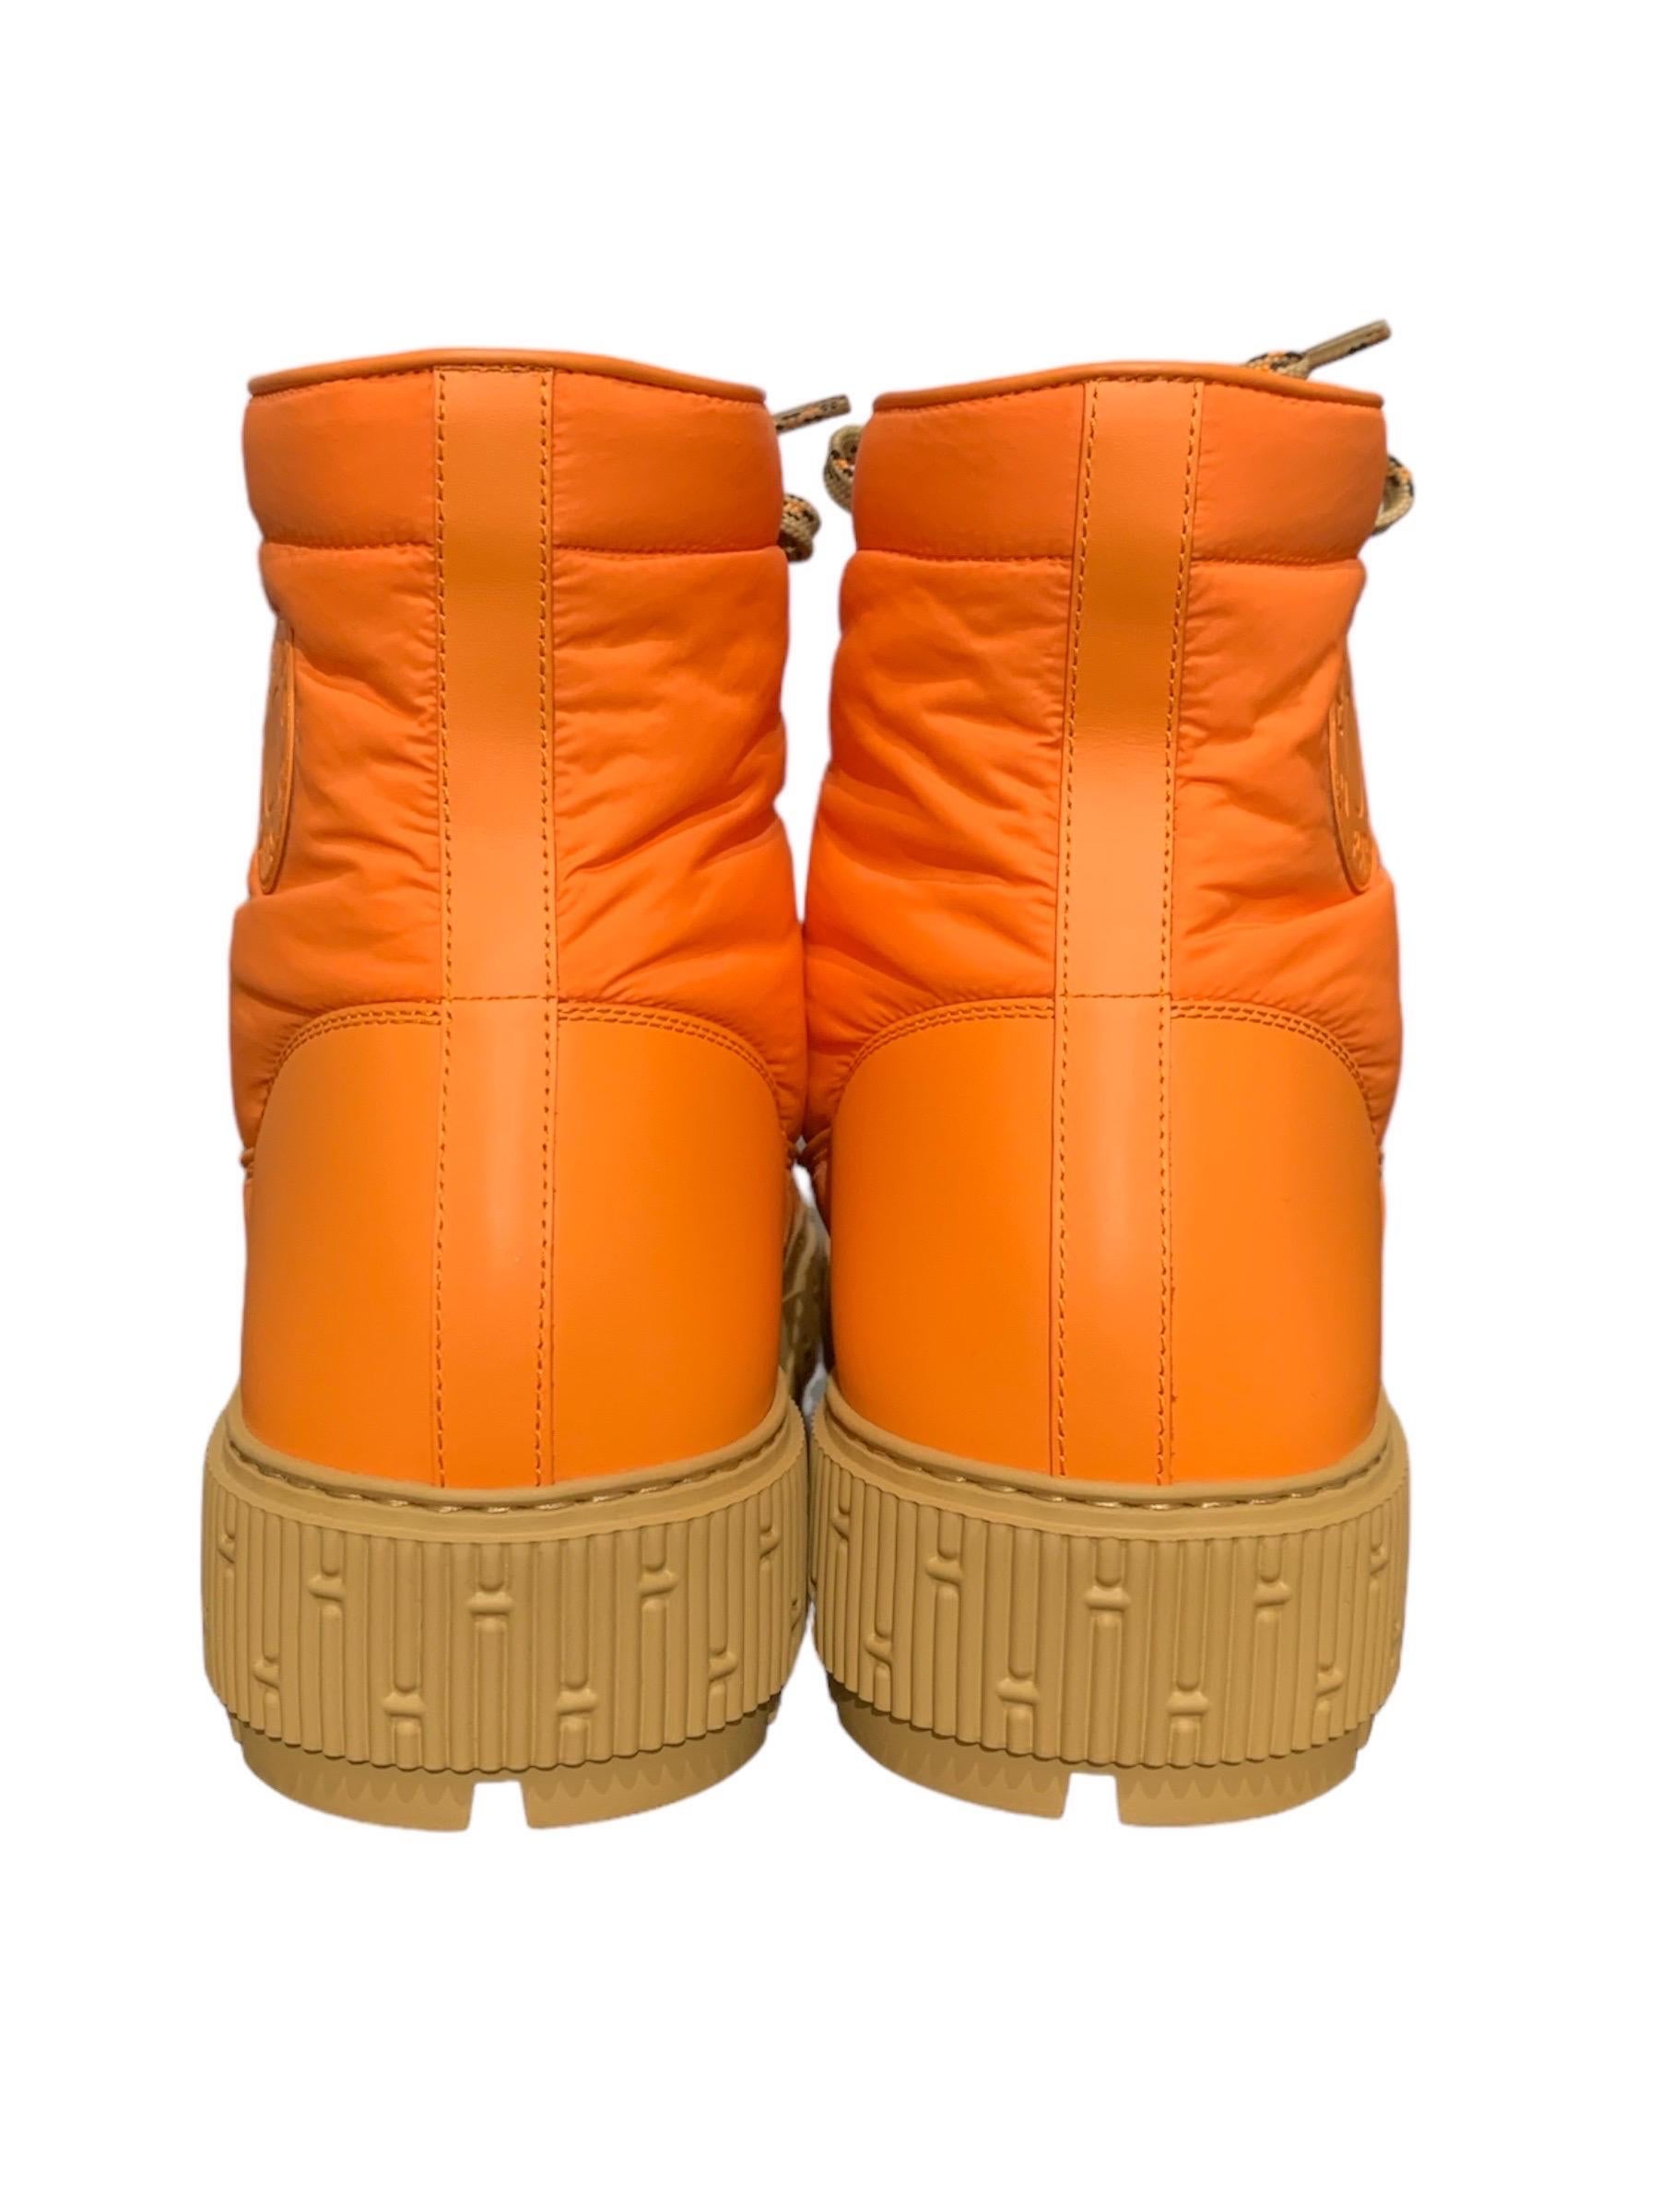 Stivali Hermes Fresh Ankle Arancio In Excellent Condition For Sale In Torre Del Greco, IT